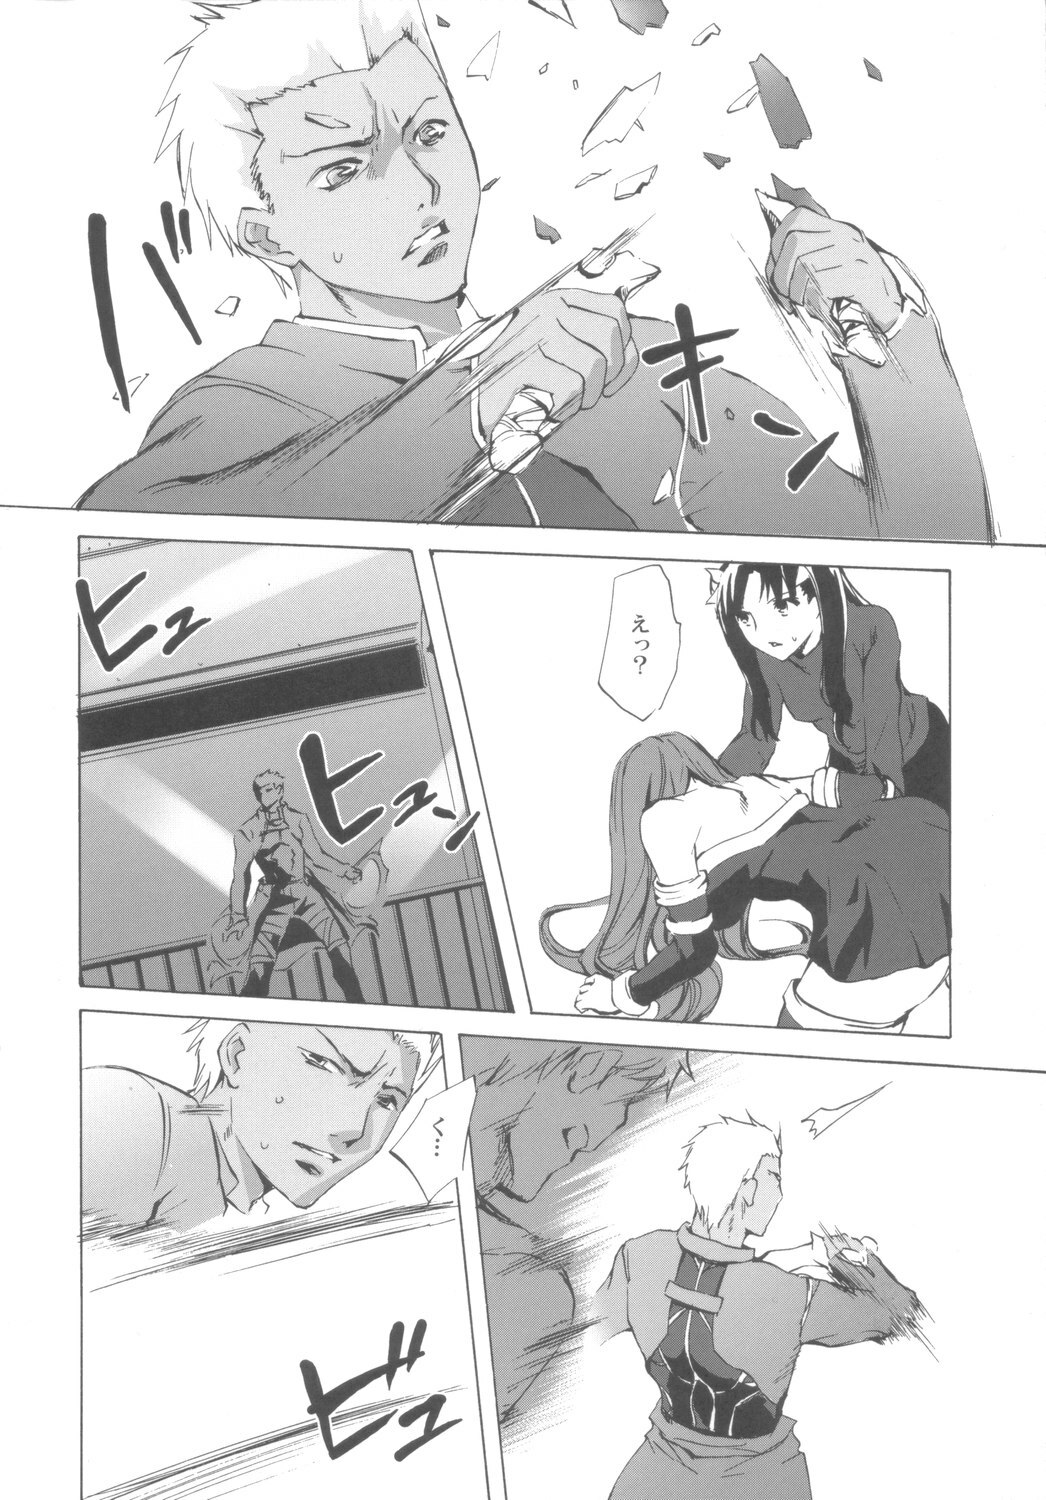 (CR37) [Clover Kai (Emua)] Face III stay memory so truth (Fate/stay night) page 3 full